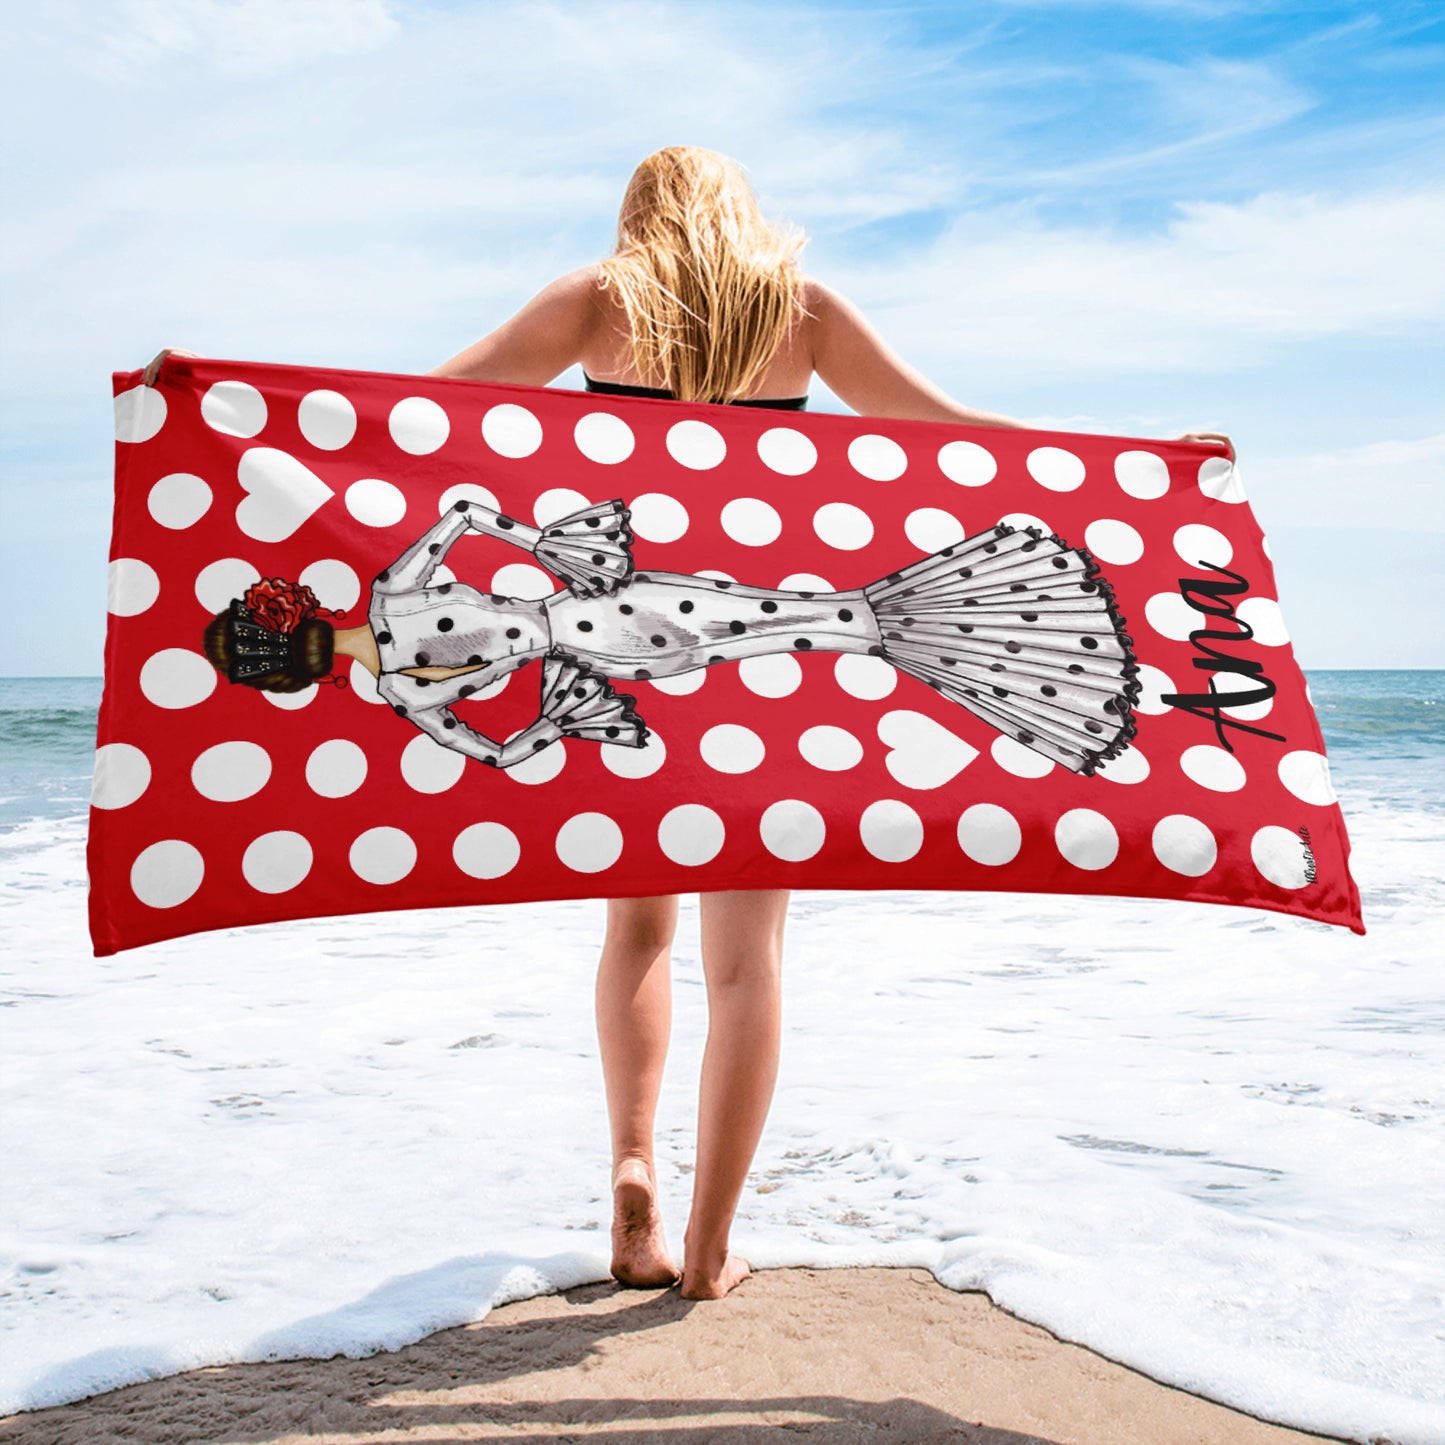 Customizable Flamenco Lovers Beach Towel - Our flamenco dancer Maria in a white dress with red background and white polka dots